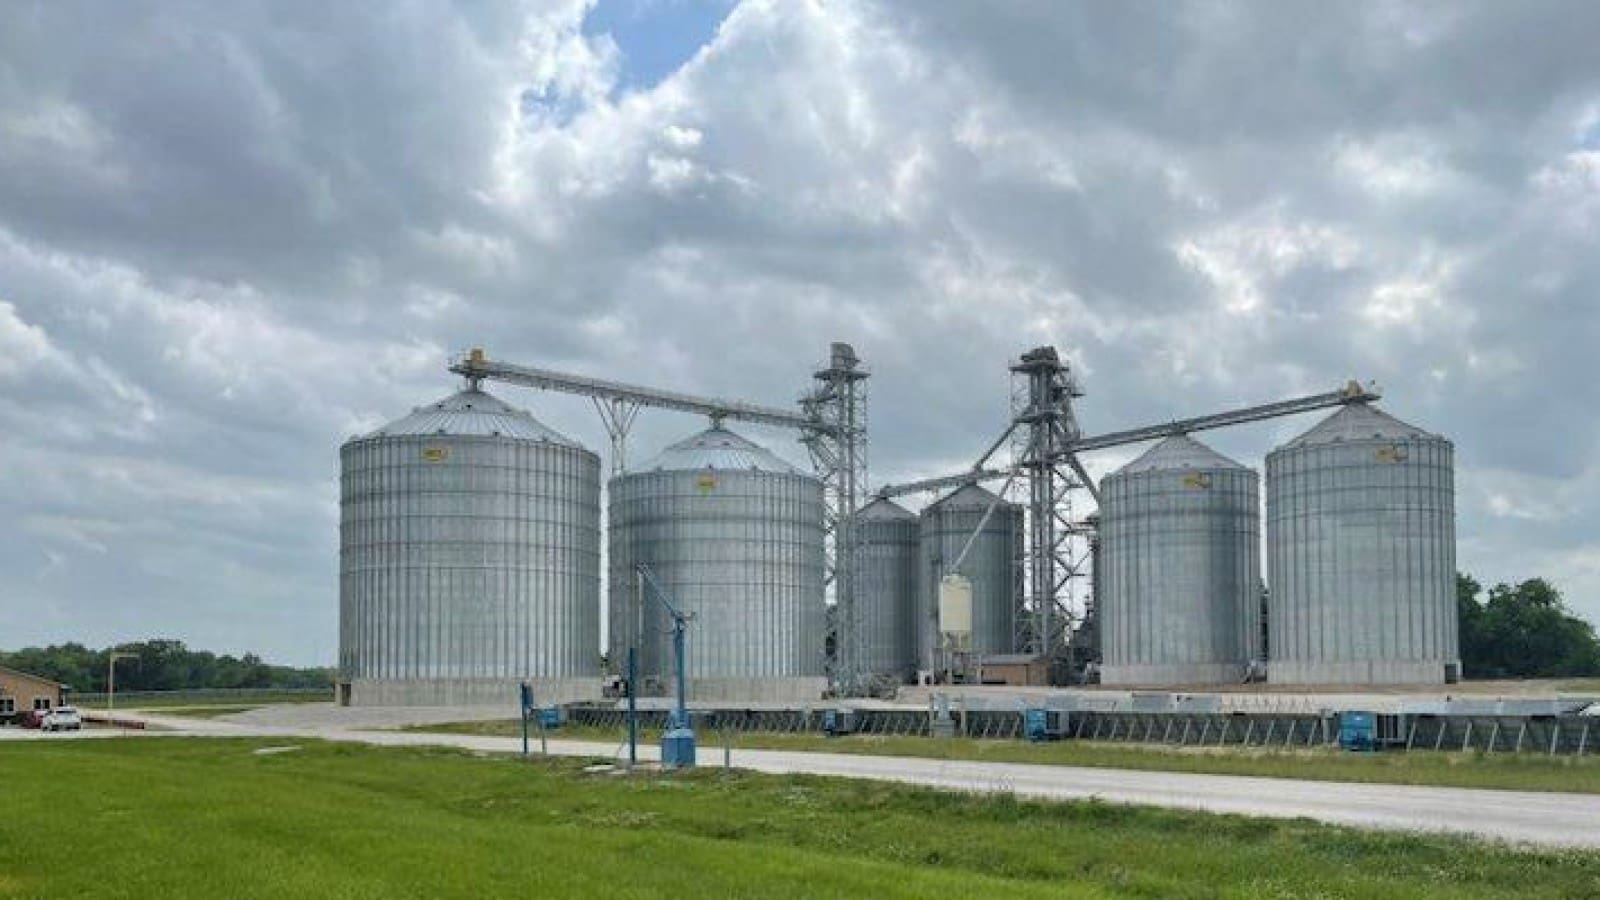 Scoular expands presence with acquisition of three grain facilities in Central Kansas